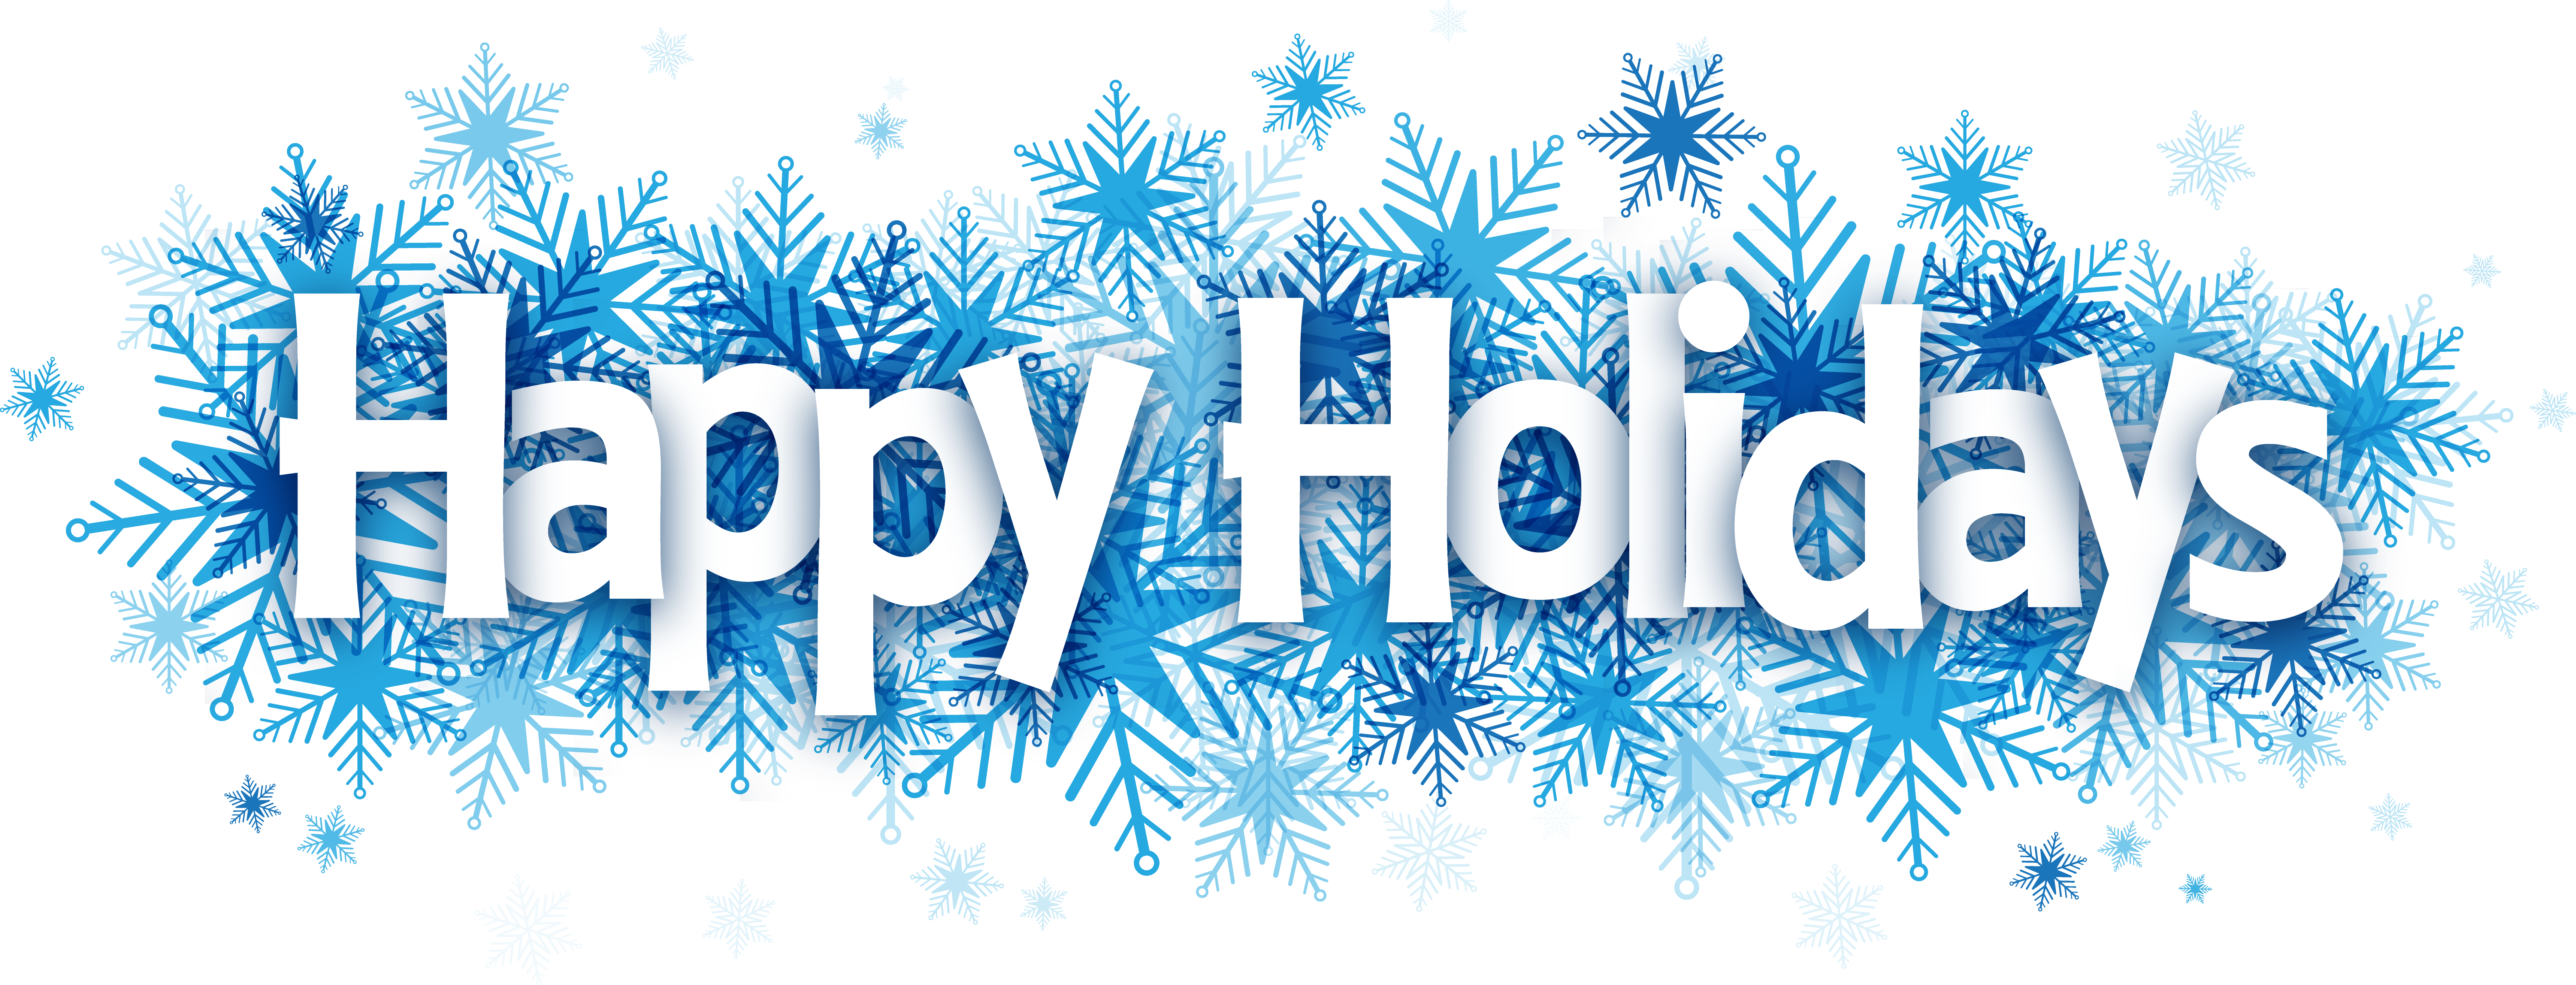 Free Happy Holidays Png Transparent, Download Free Happy Holidays Png